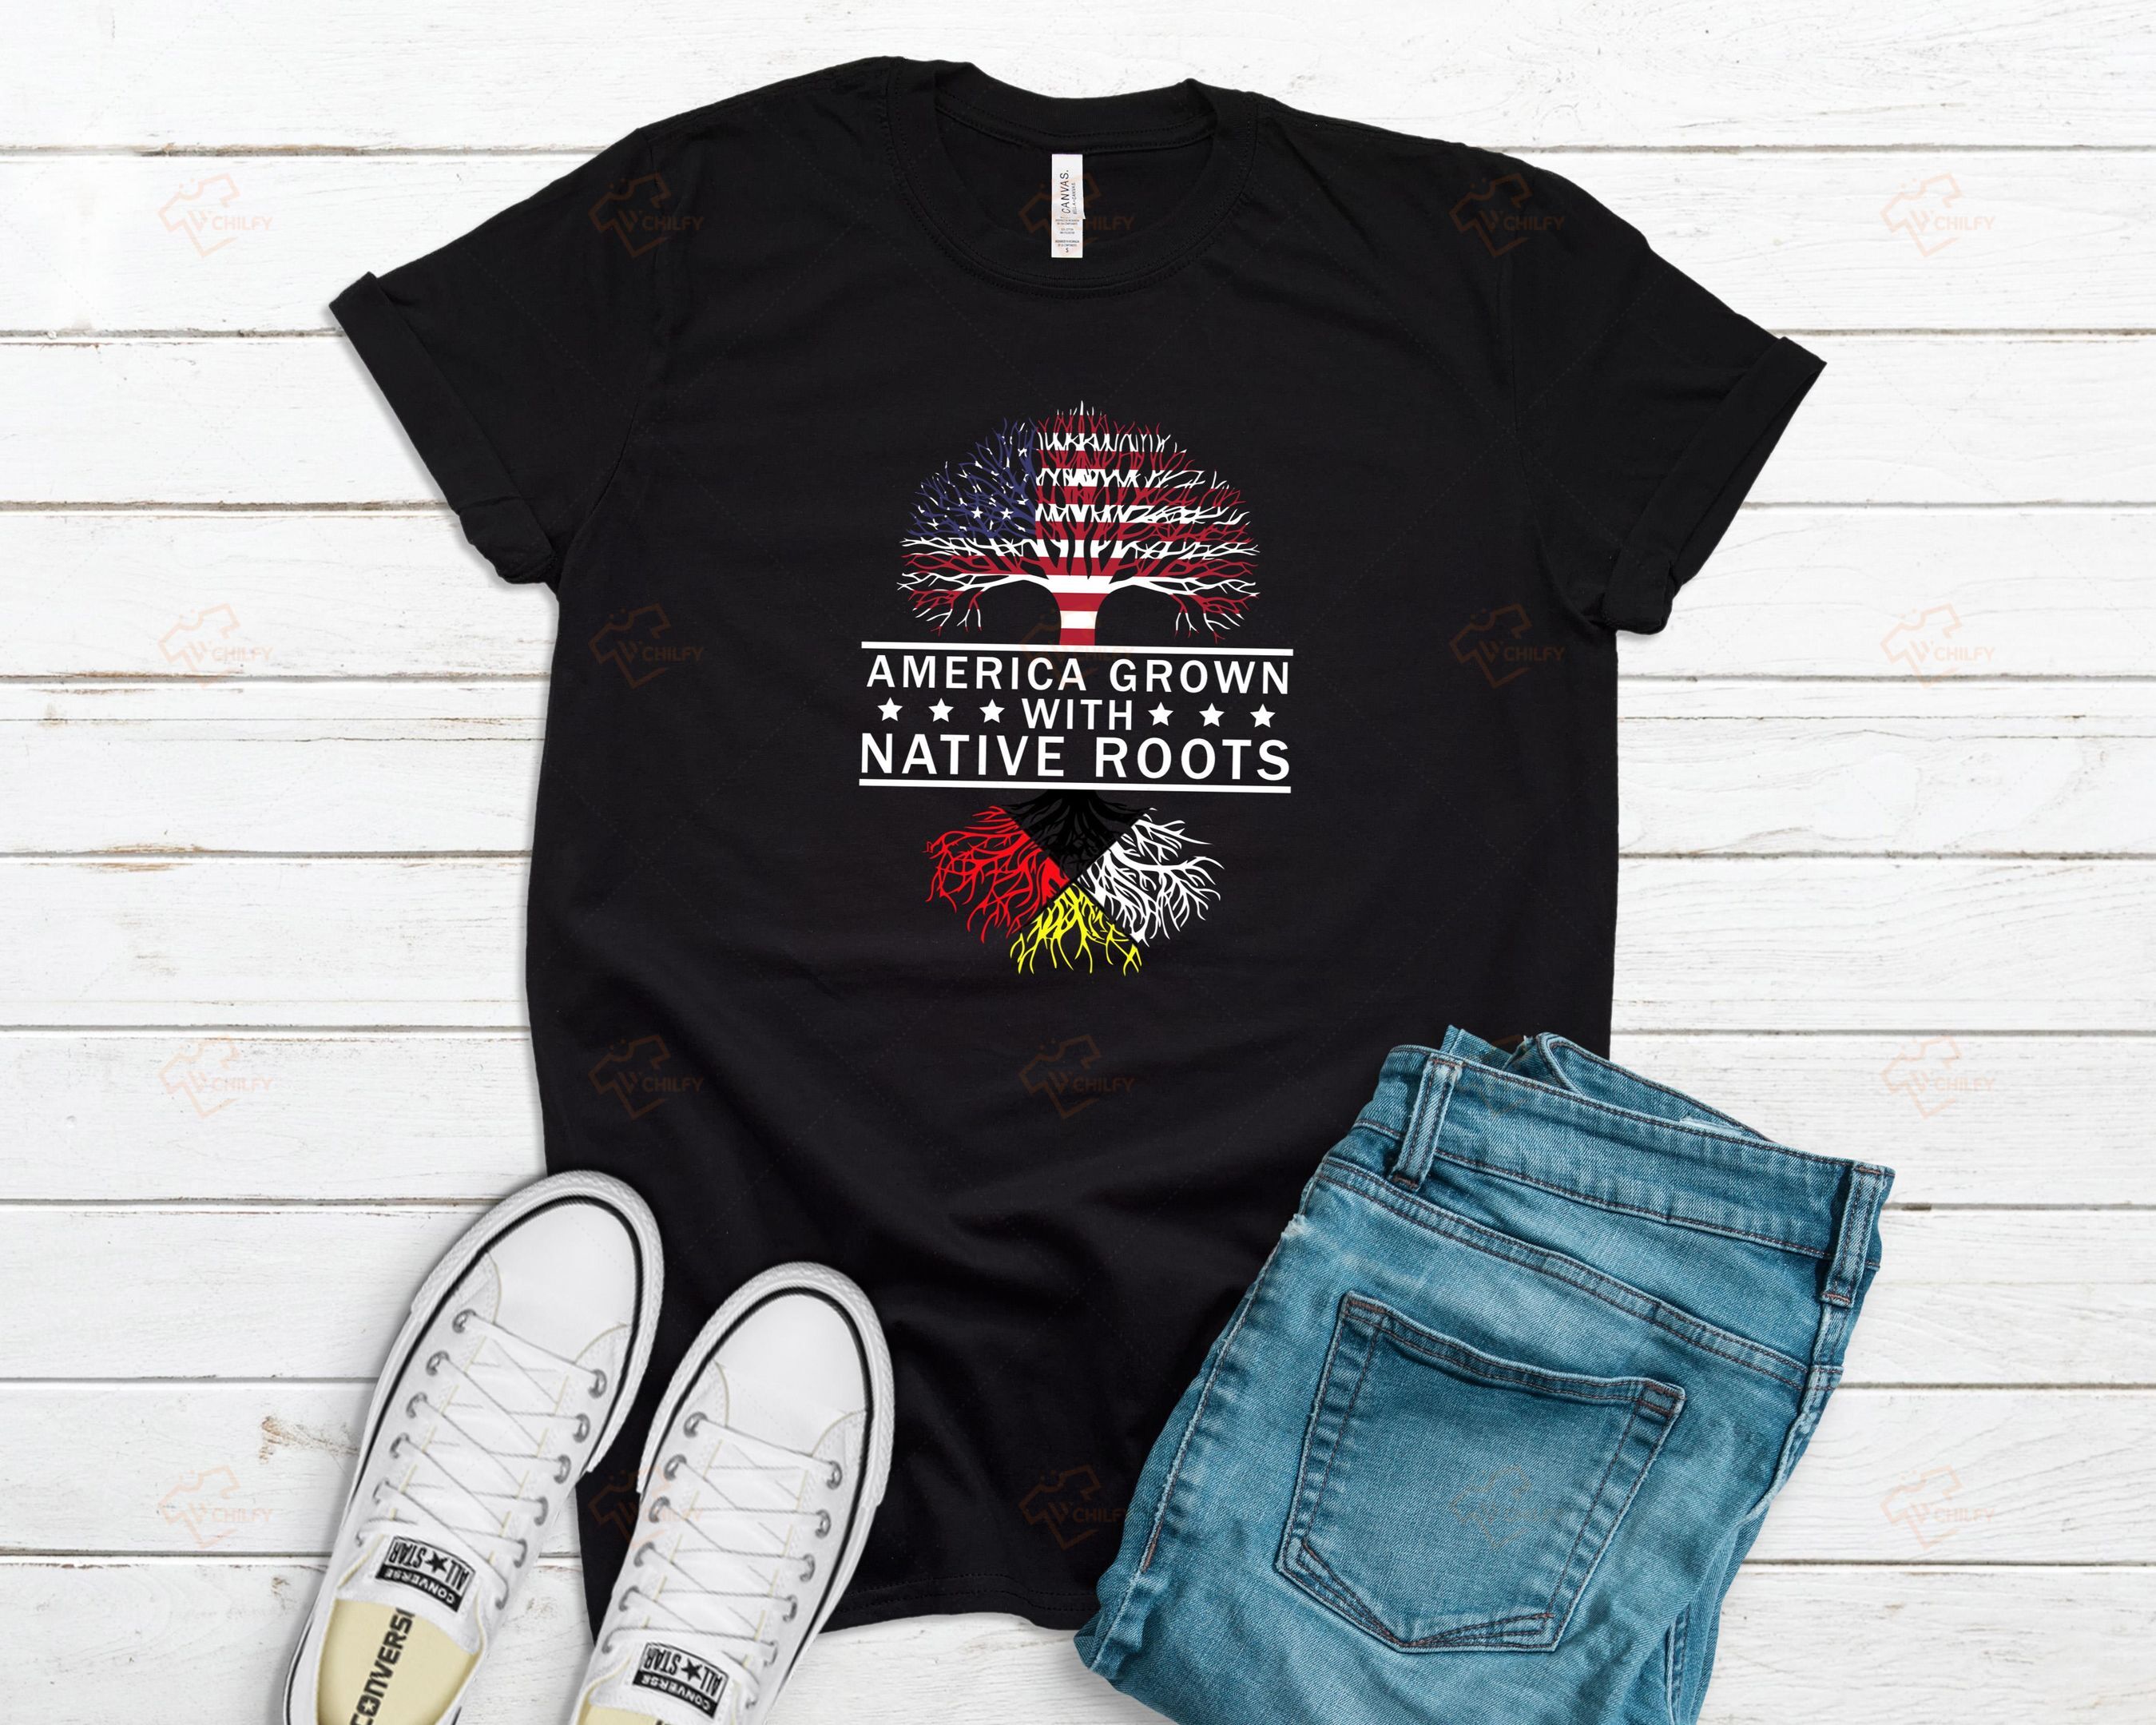 american grown with native roots shirt, Native American t shirt, Indigenous pride shirt